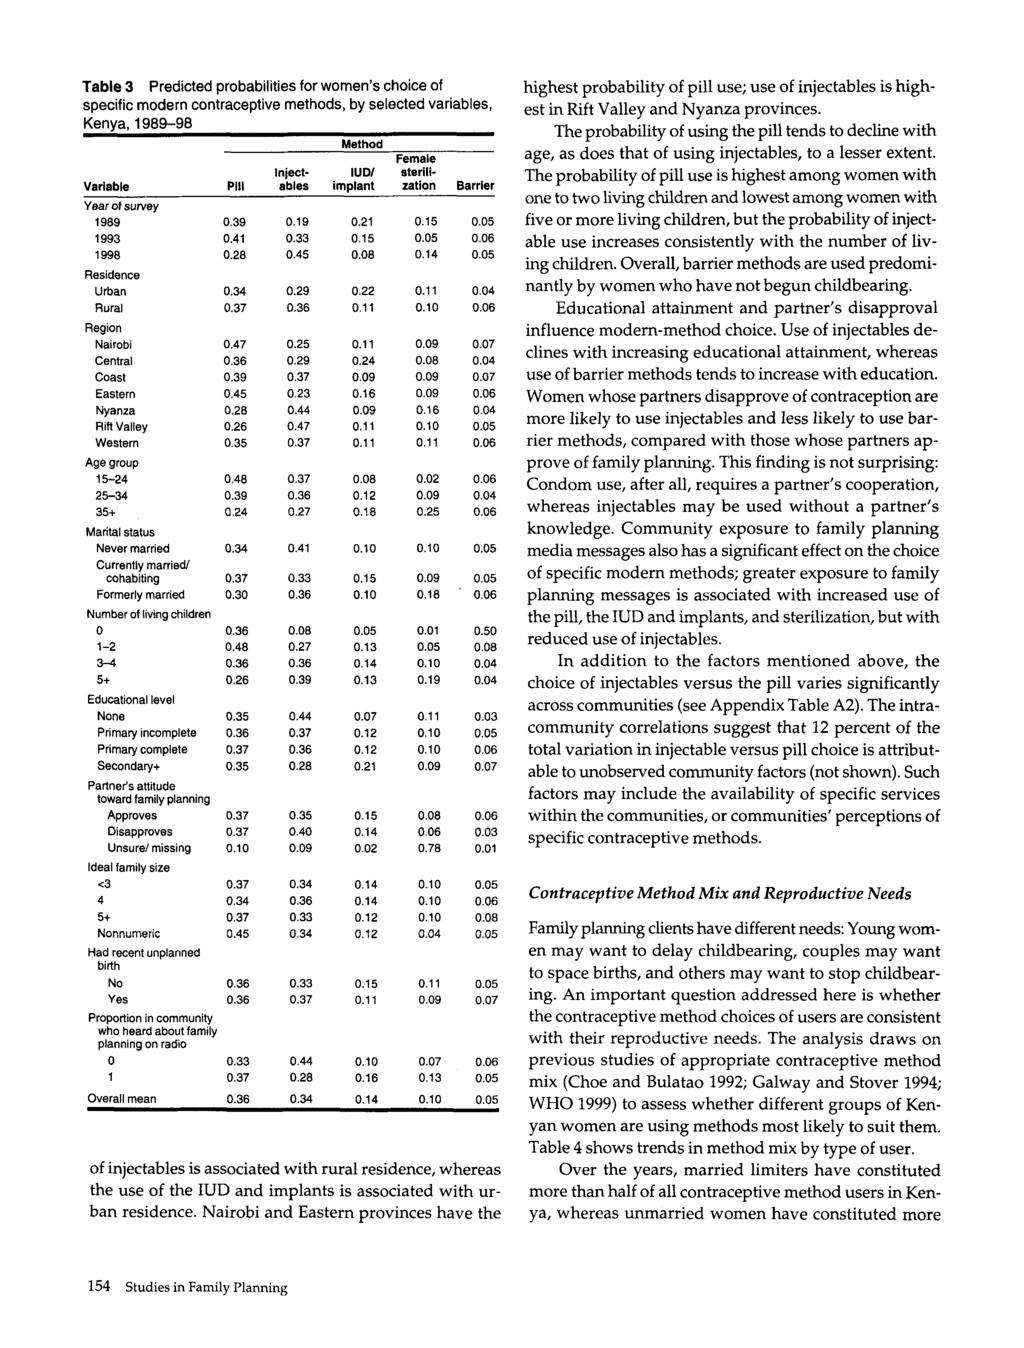 Table 3 Predicted probabilities for women s choice of specific modern contraceptive methods, by selected variables, Kenya, 1989-98 Method Female Inject- IUD/ sterili- Variable Pill ables imnlant